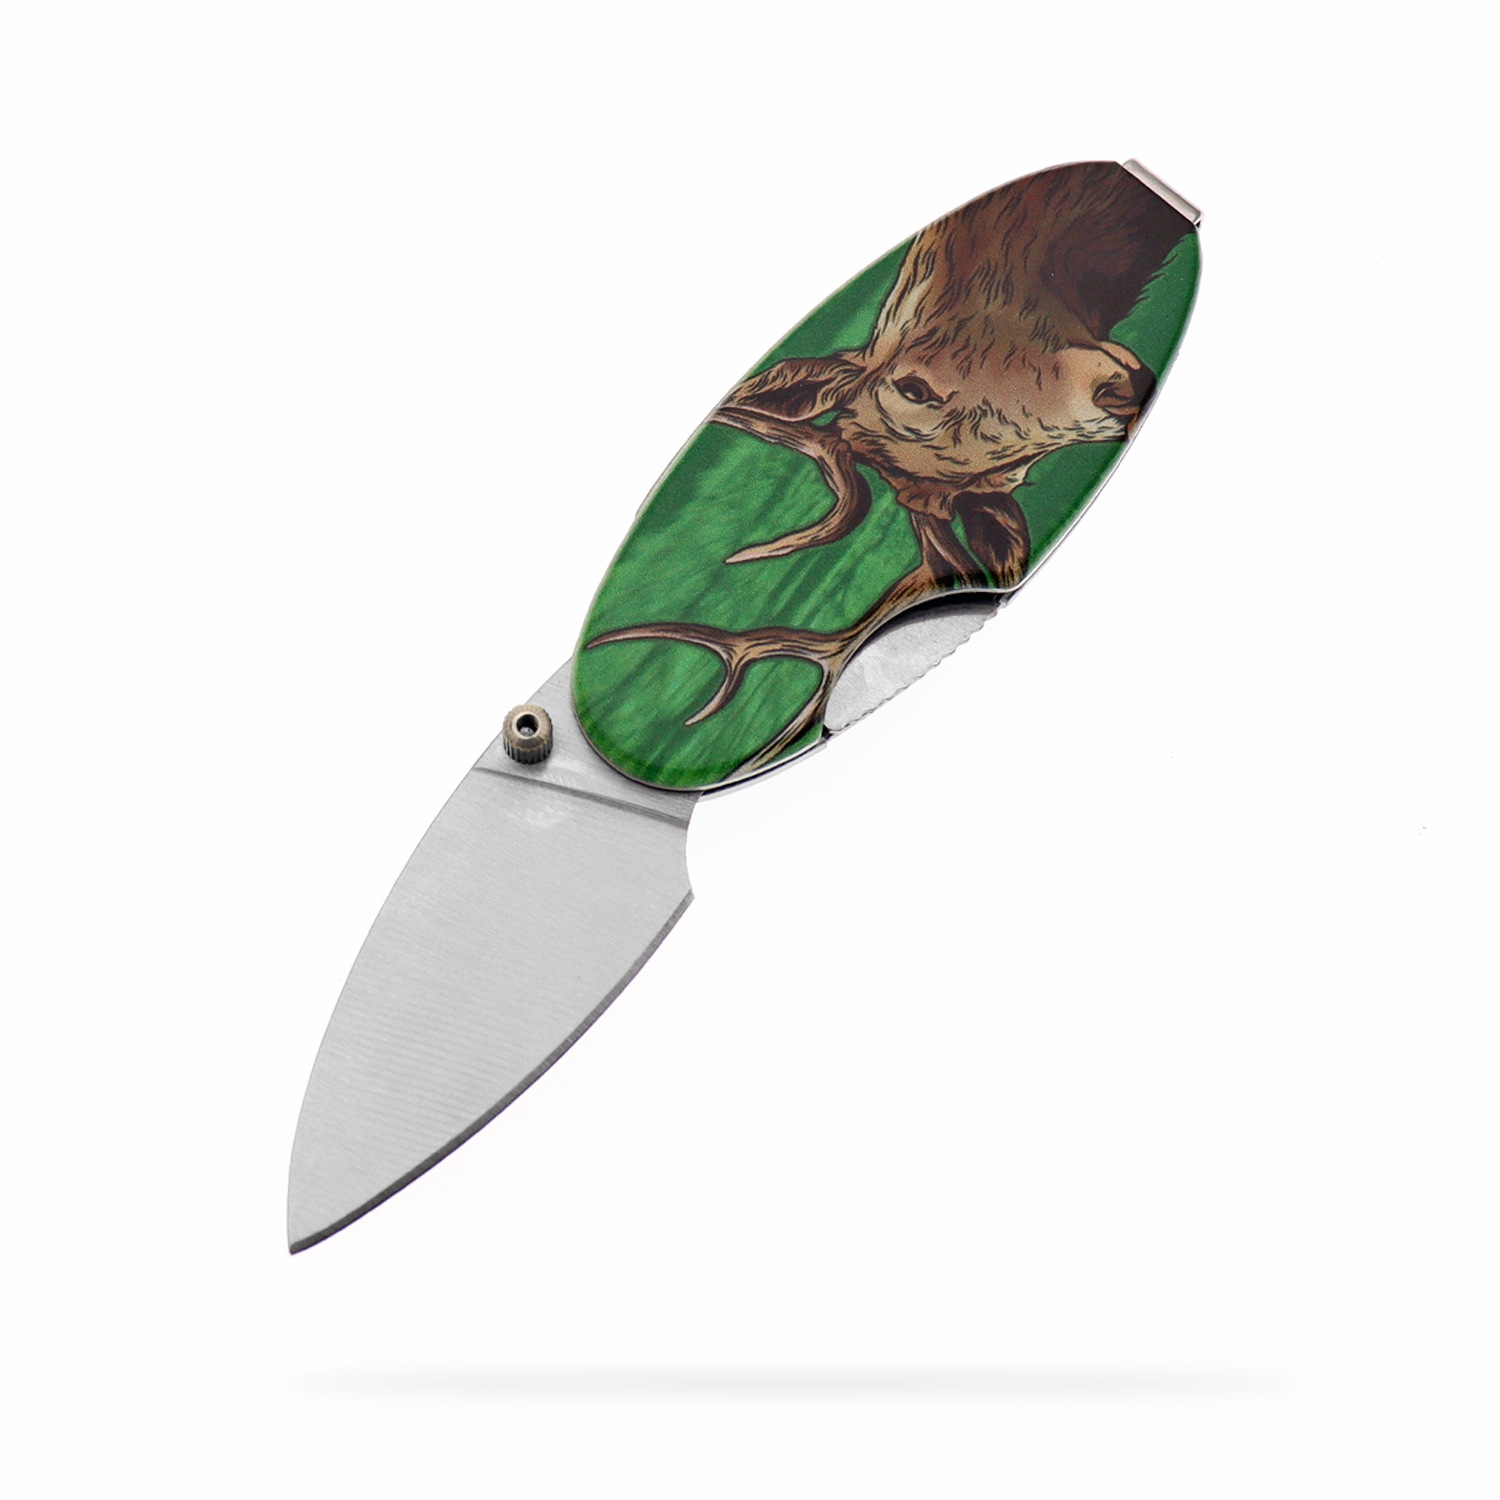 Manufacturer supply gift knife Christmas main body deer head designated pattern stainless steel folding knife wallet promotion holiday